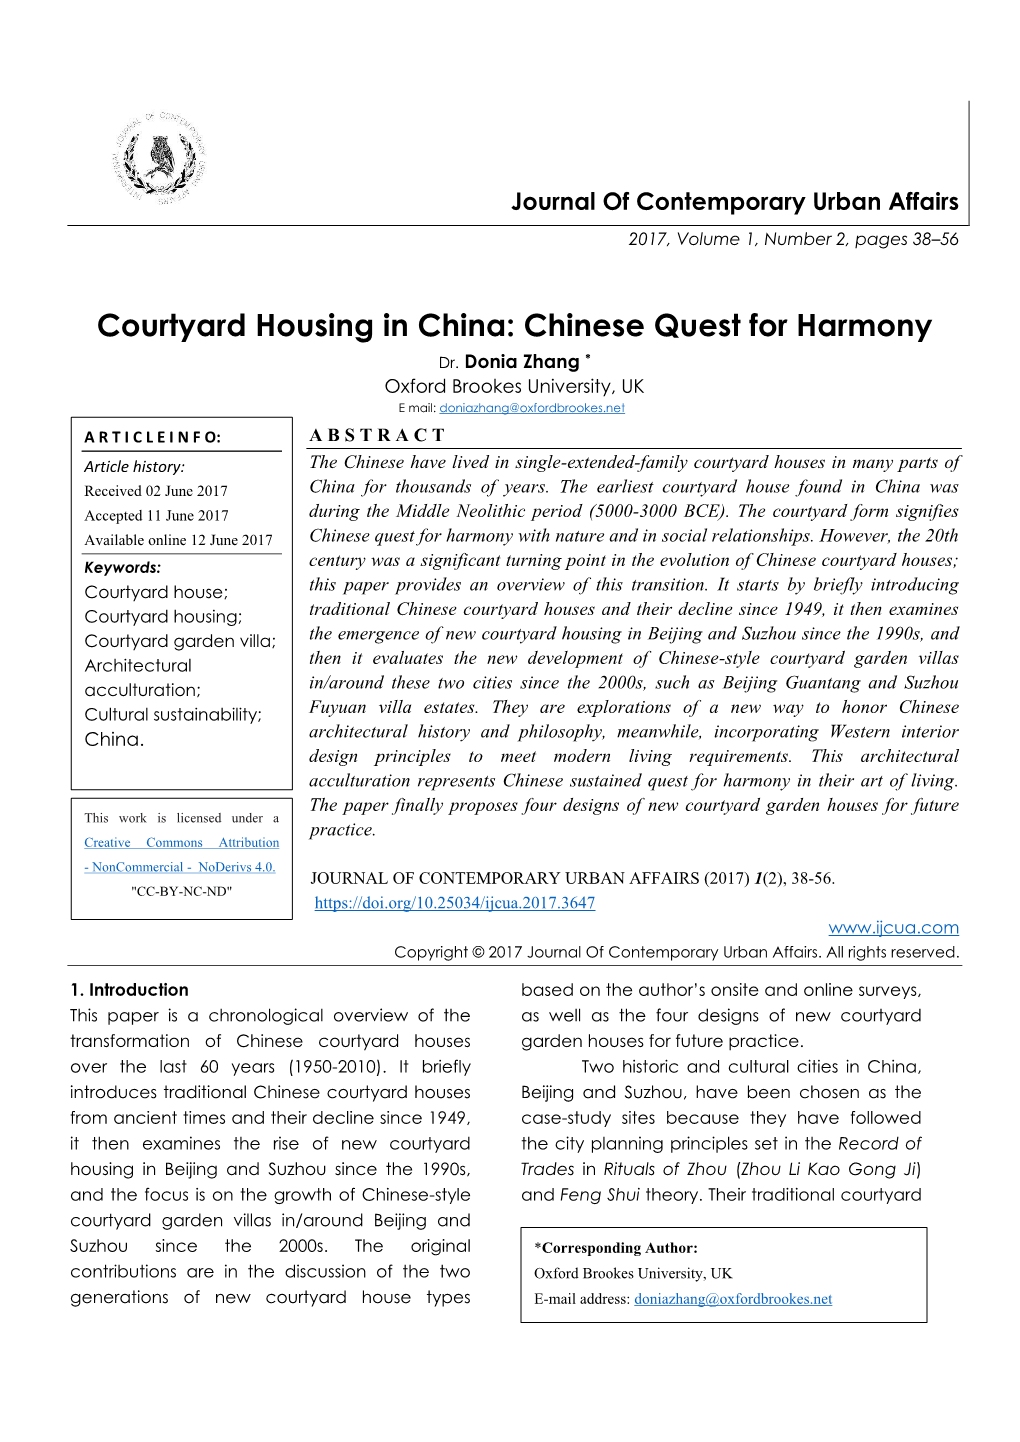 Courtyard Housing in China: Chinese Quest for Harmony Dr